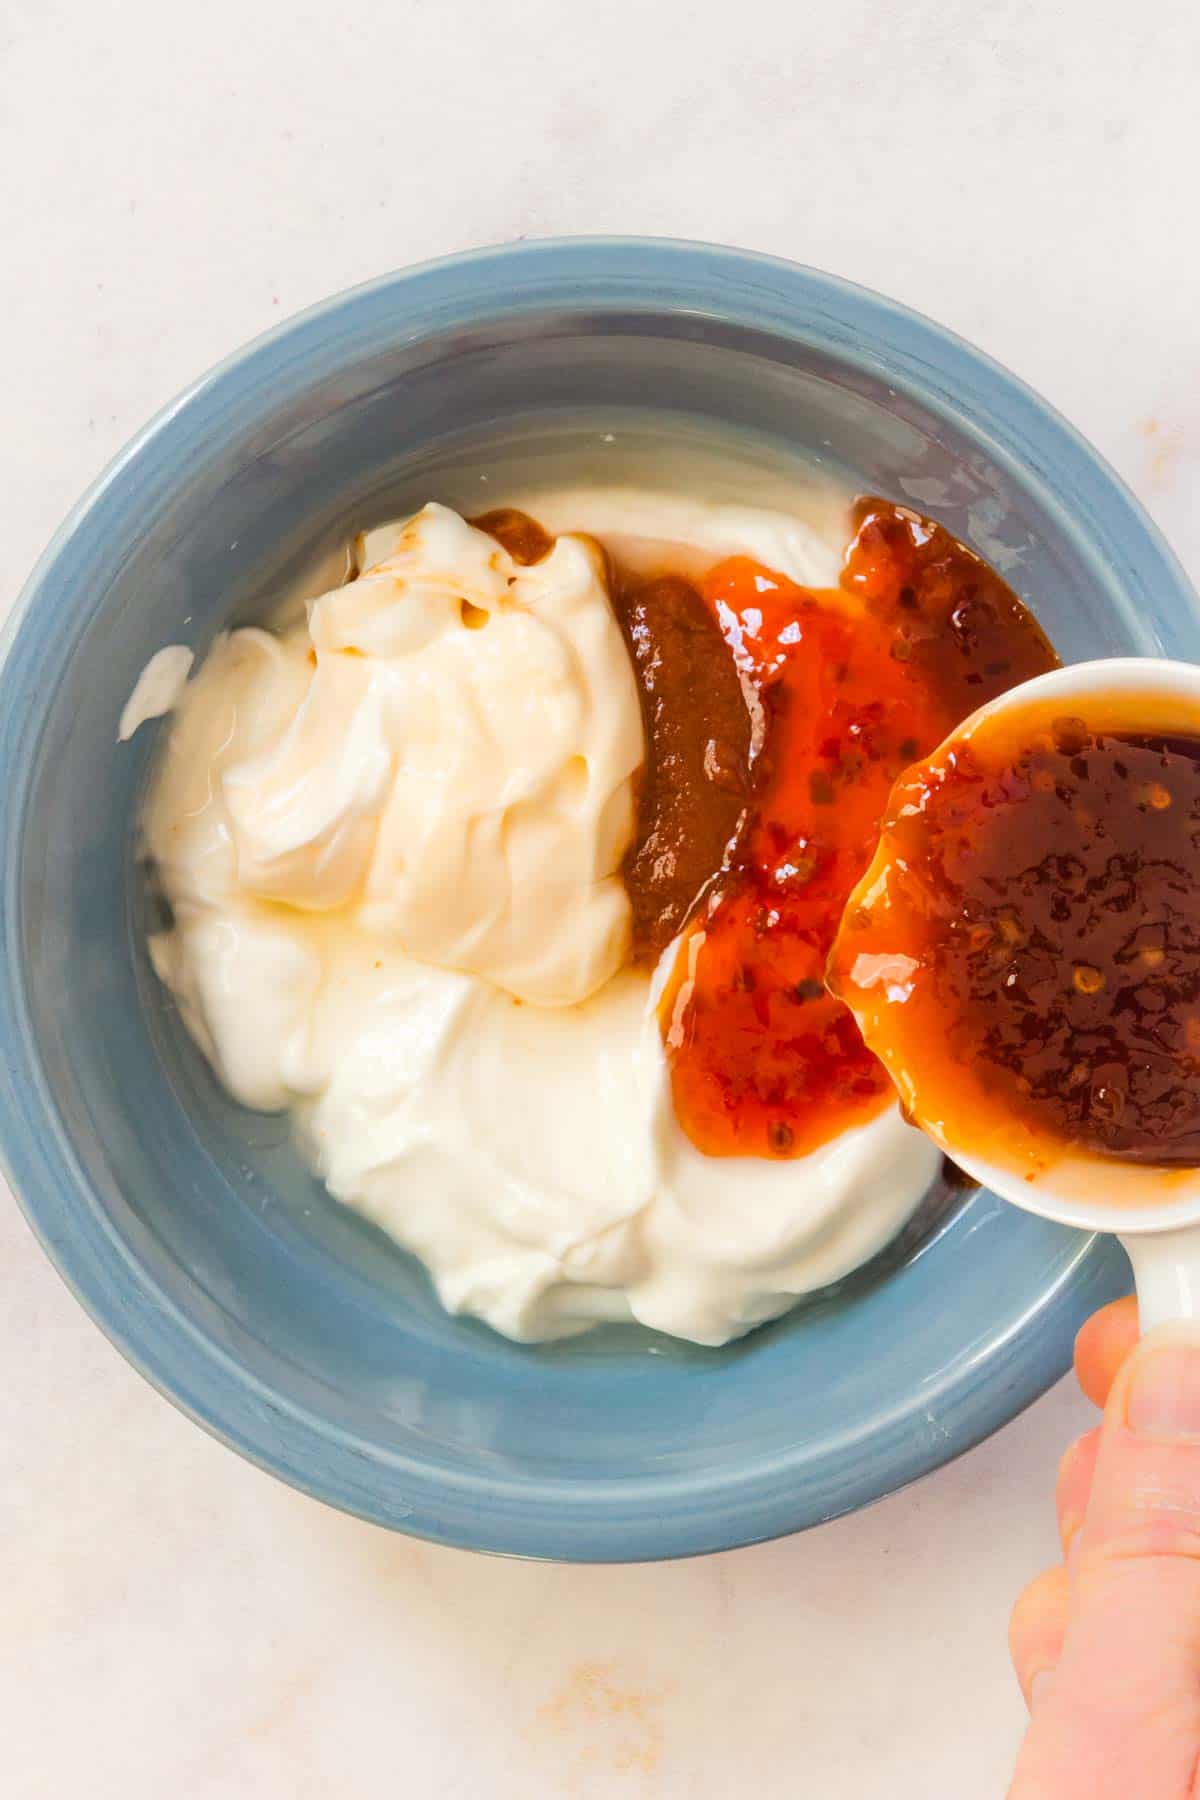 Pouring chili sauce into a blue bowl with Greek yogurt and mayonnaise.